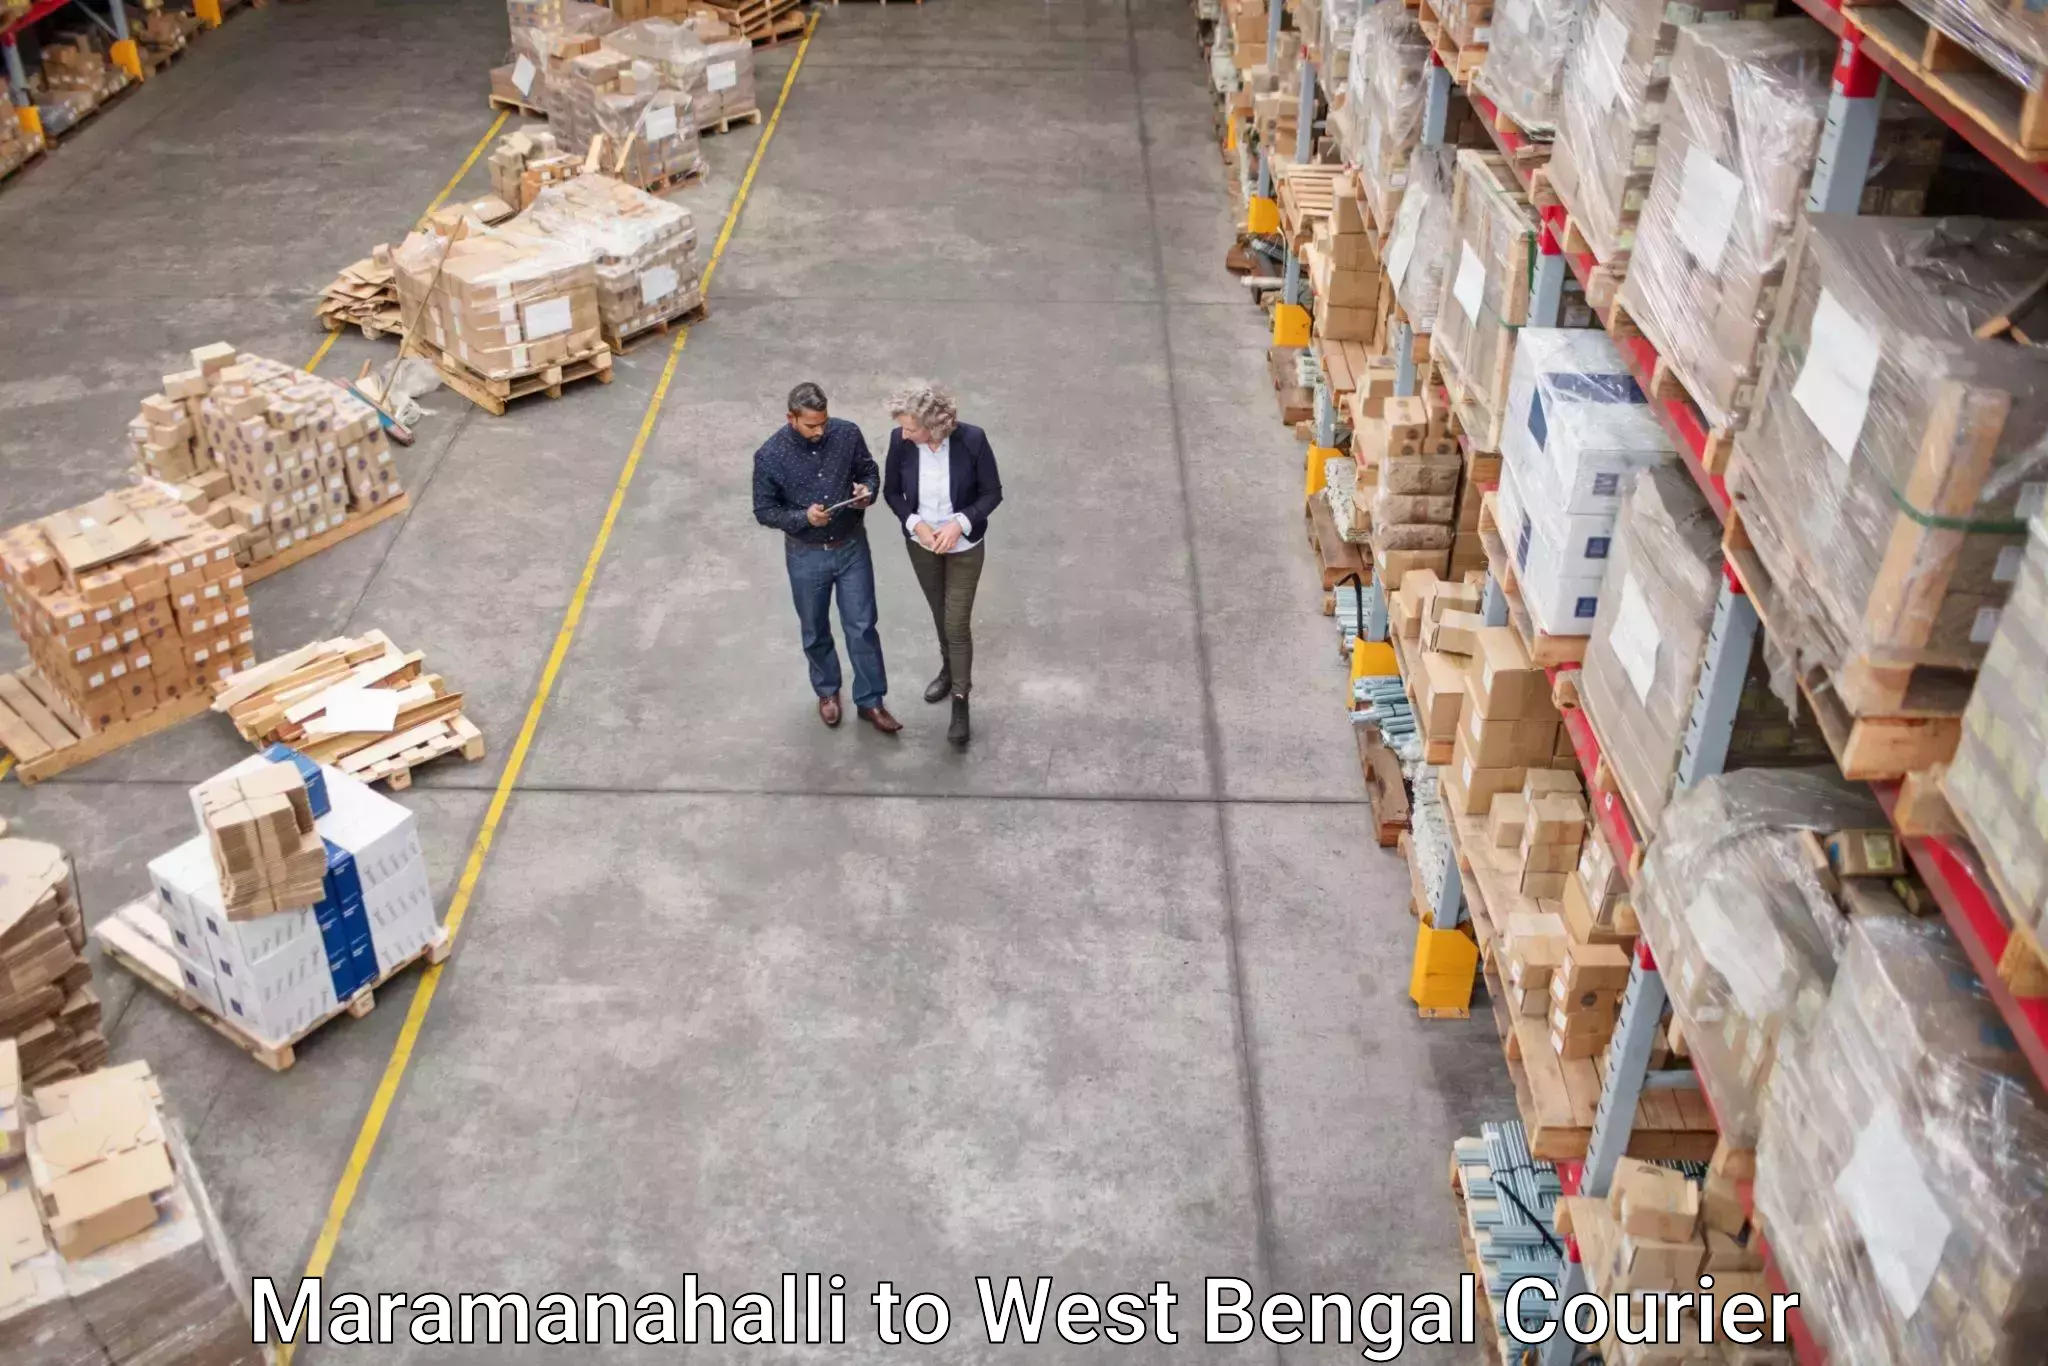 State-of-the-art courier technology Maramanahalli to West Bengal